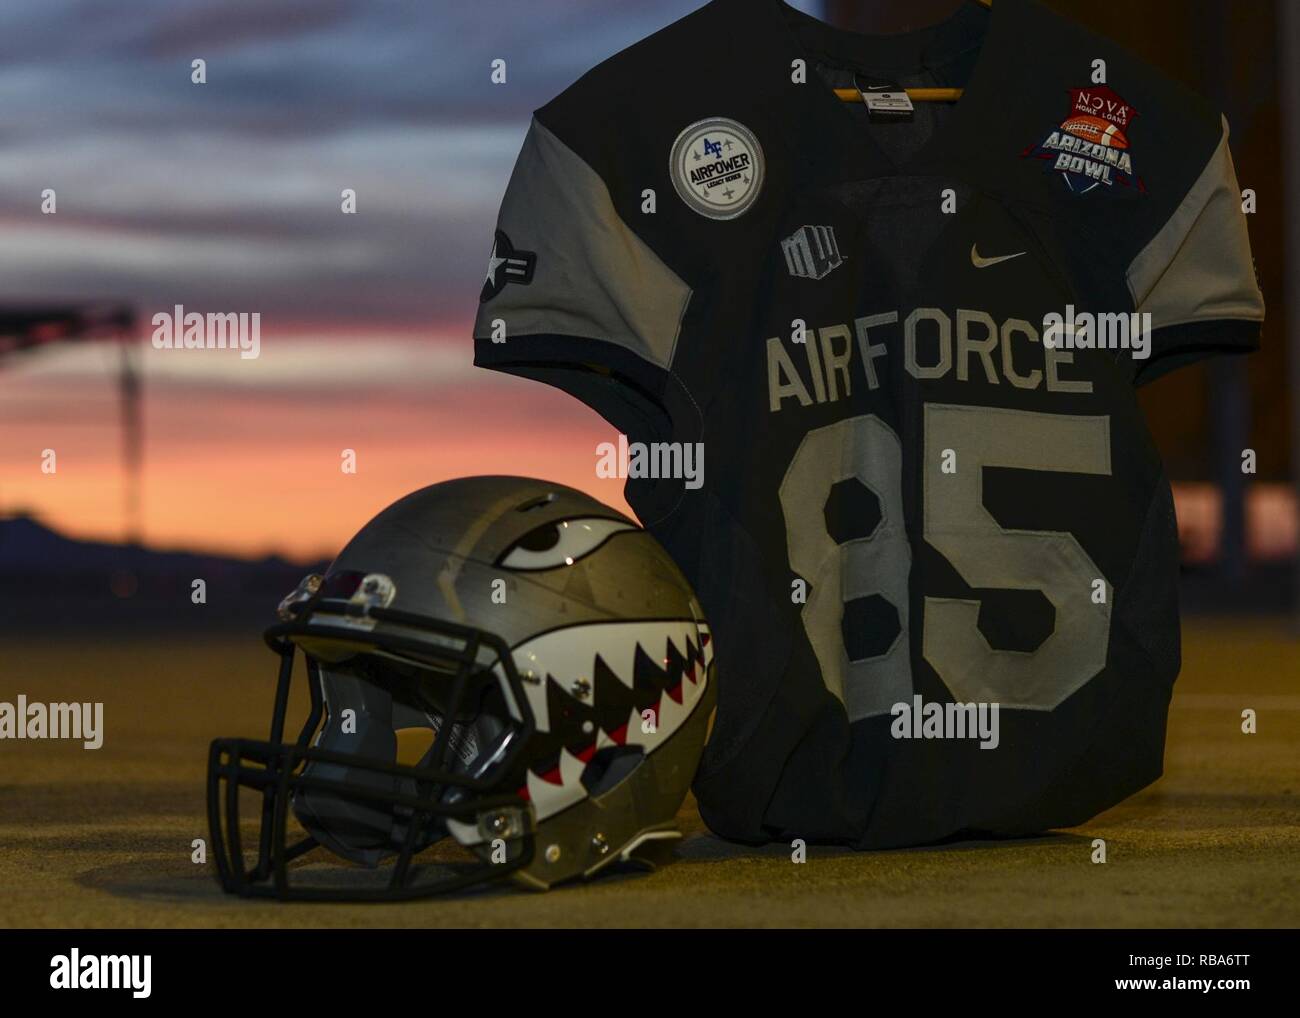 A U.S. Air Force Academy football team helmet and jersey are